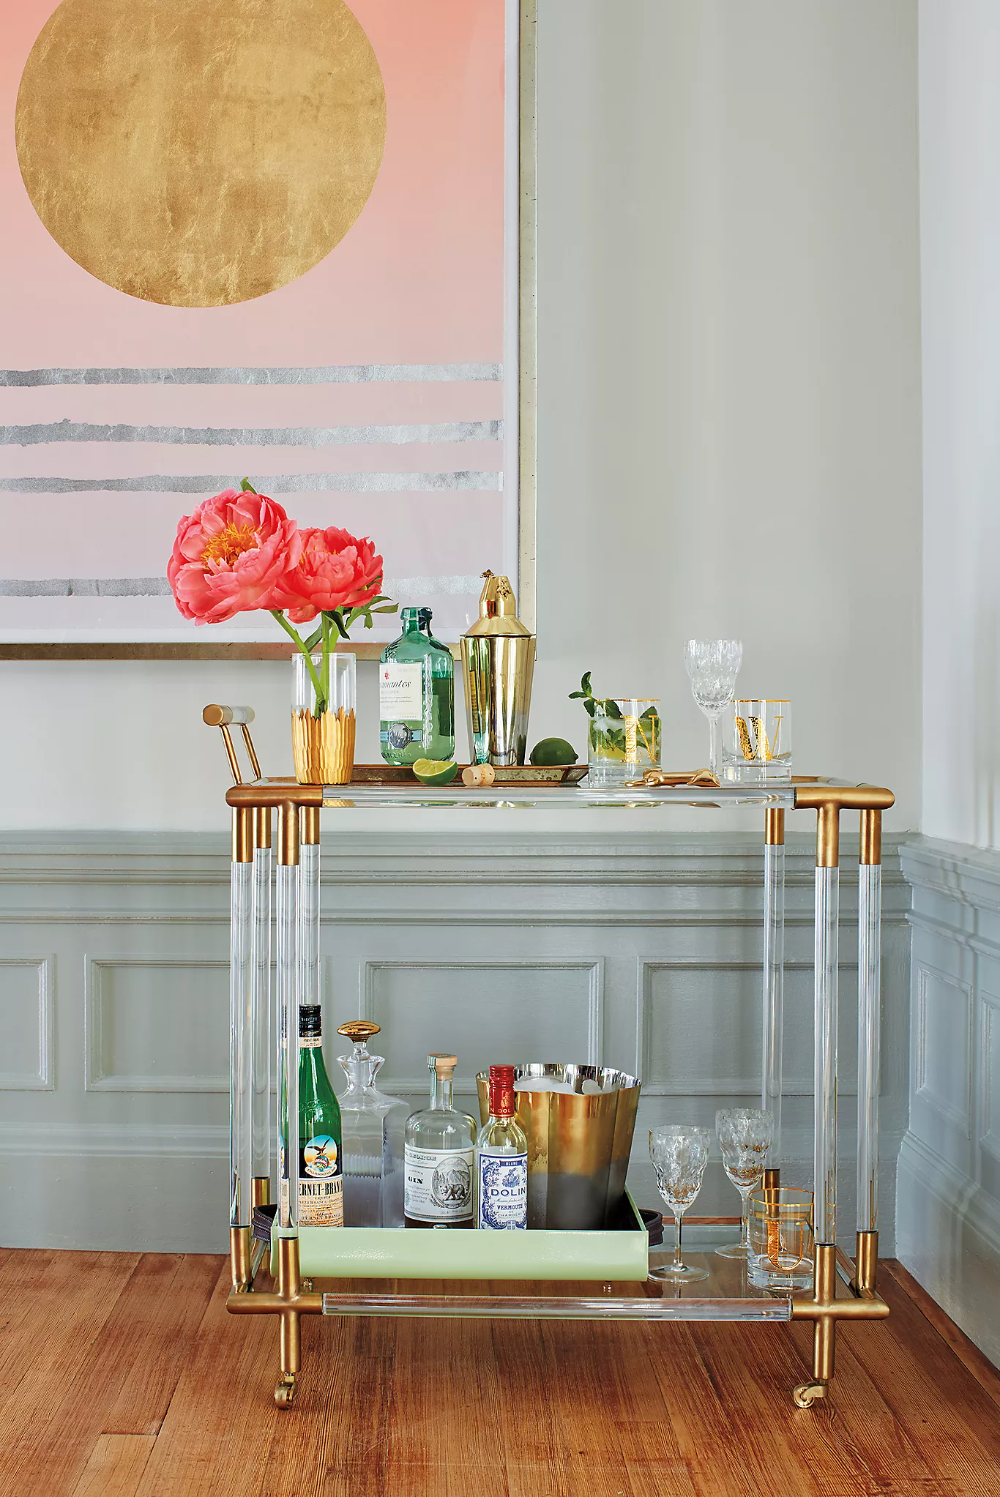  If you want to get really fancy, go with the Oscarine Lucite and Gold Bar Cart from  Anthropologie . There’s no denying the glitz and glamour of this piece which functions as a bar cart, but looks more like a high end sculpture. 